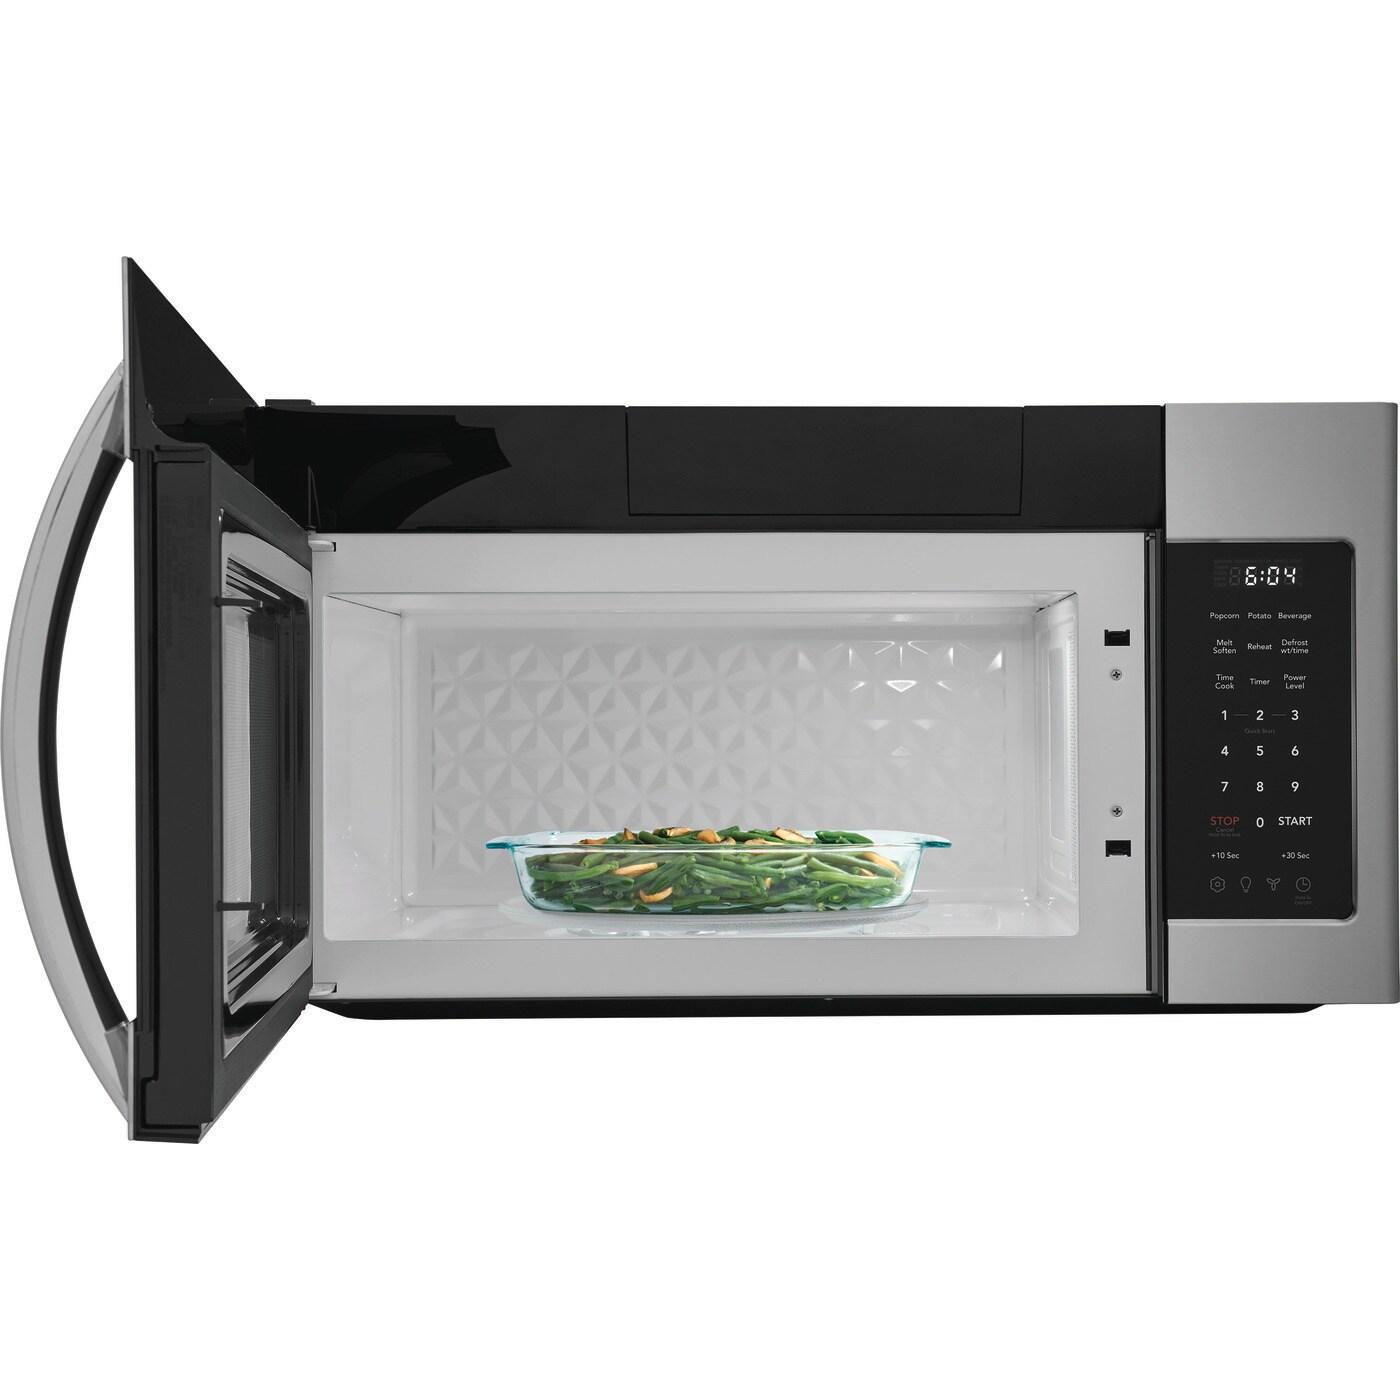 Frigidaire 30-inch, 1.8 cu. ft. Over-the-Range Microwave Oven FMOS1846BS